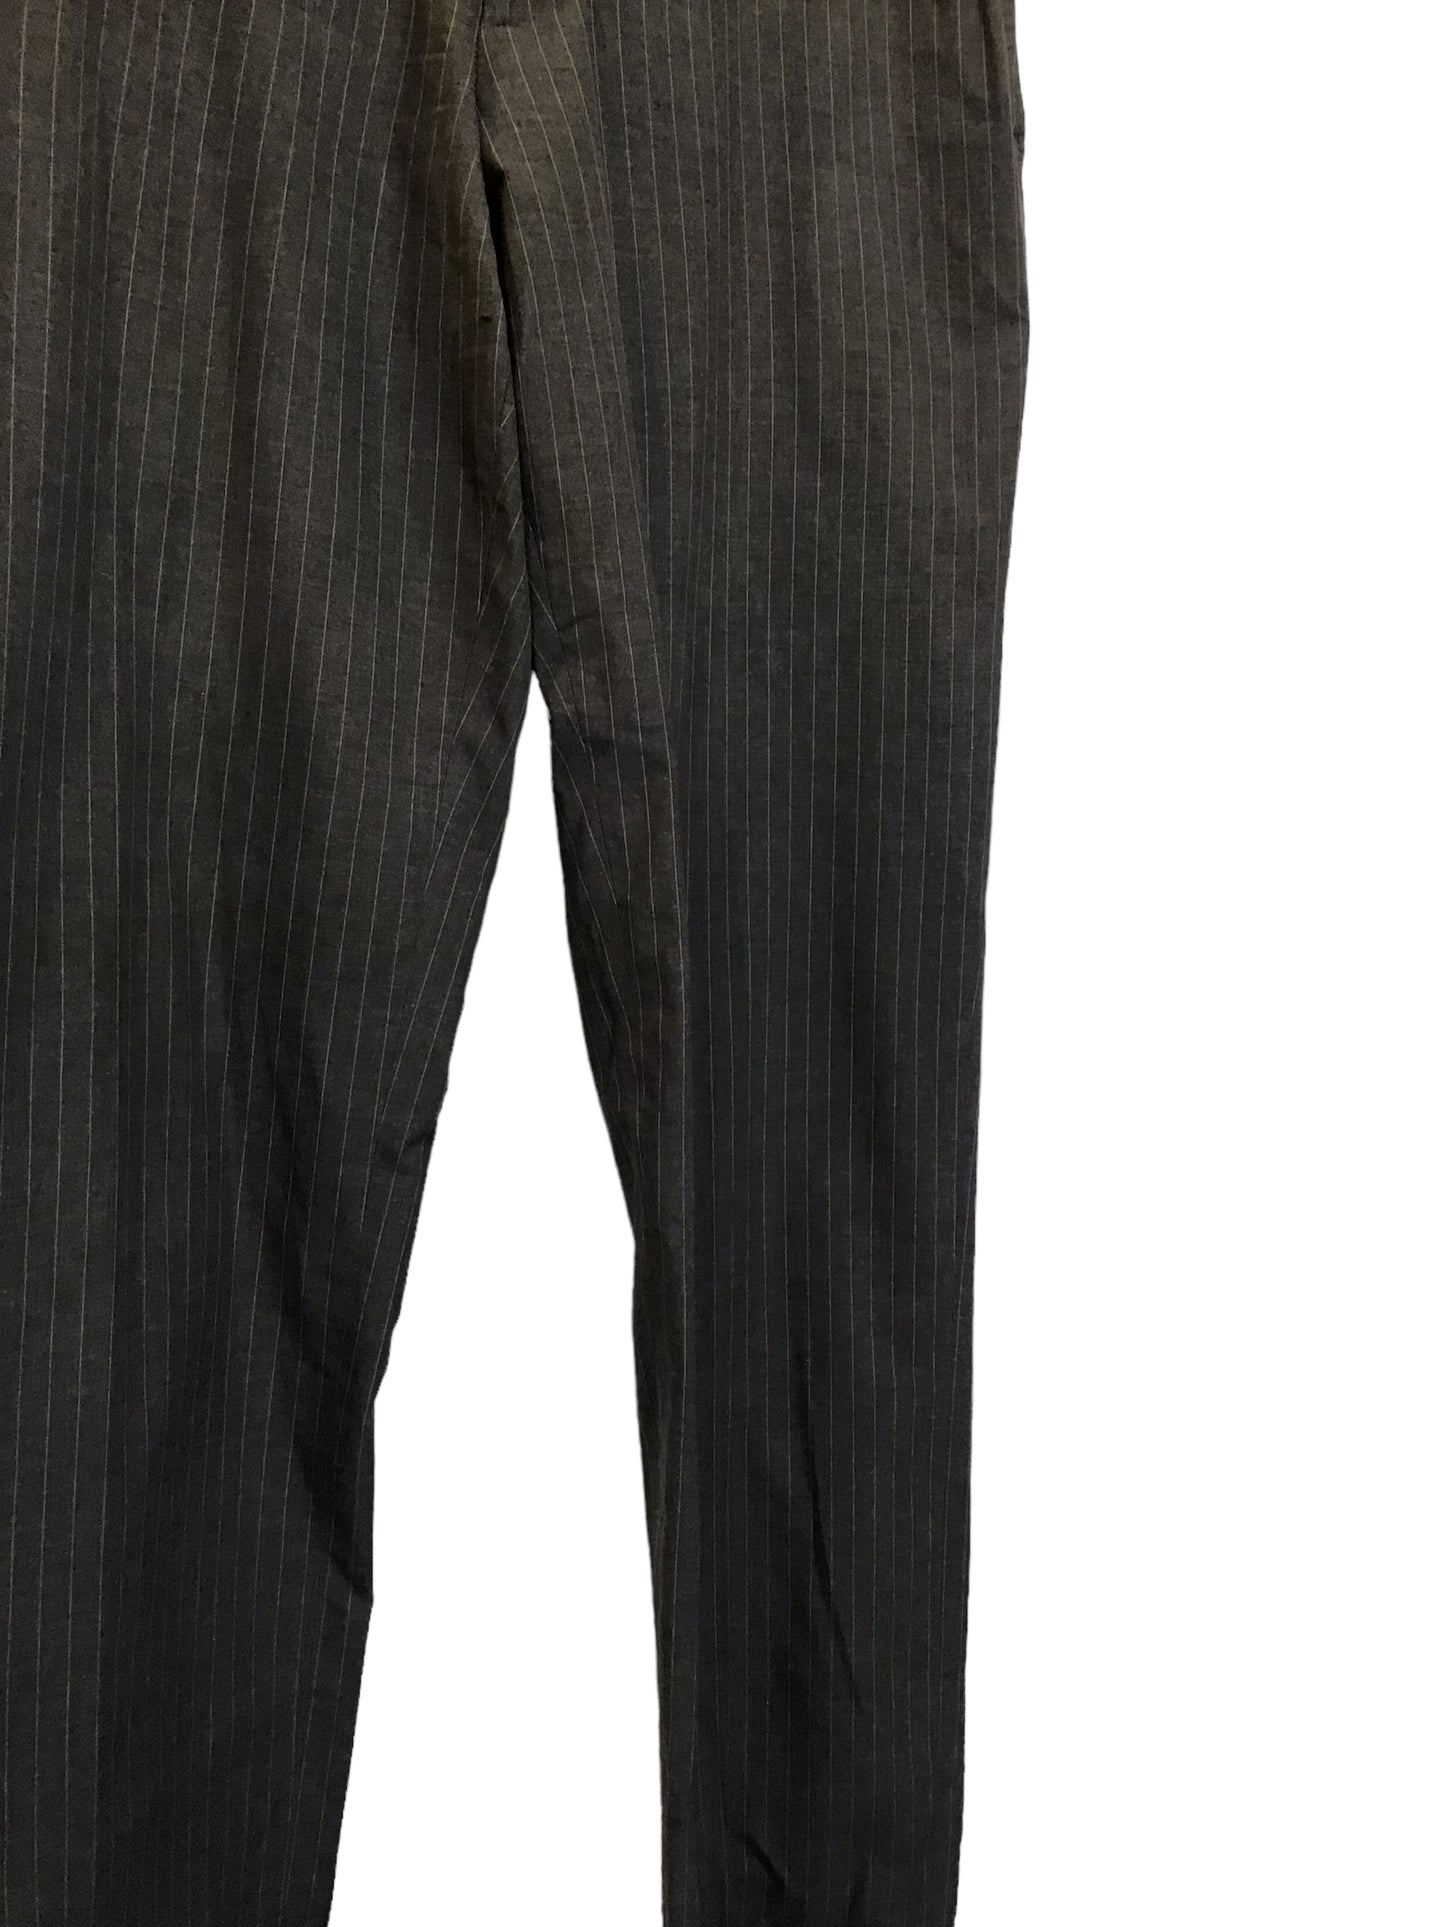 Hugo Boss Pinstriped Suit Trousers (Size XL)